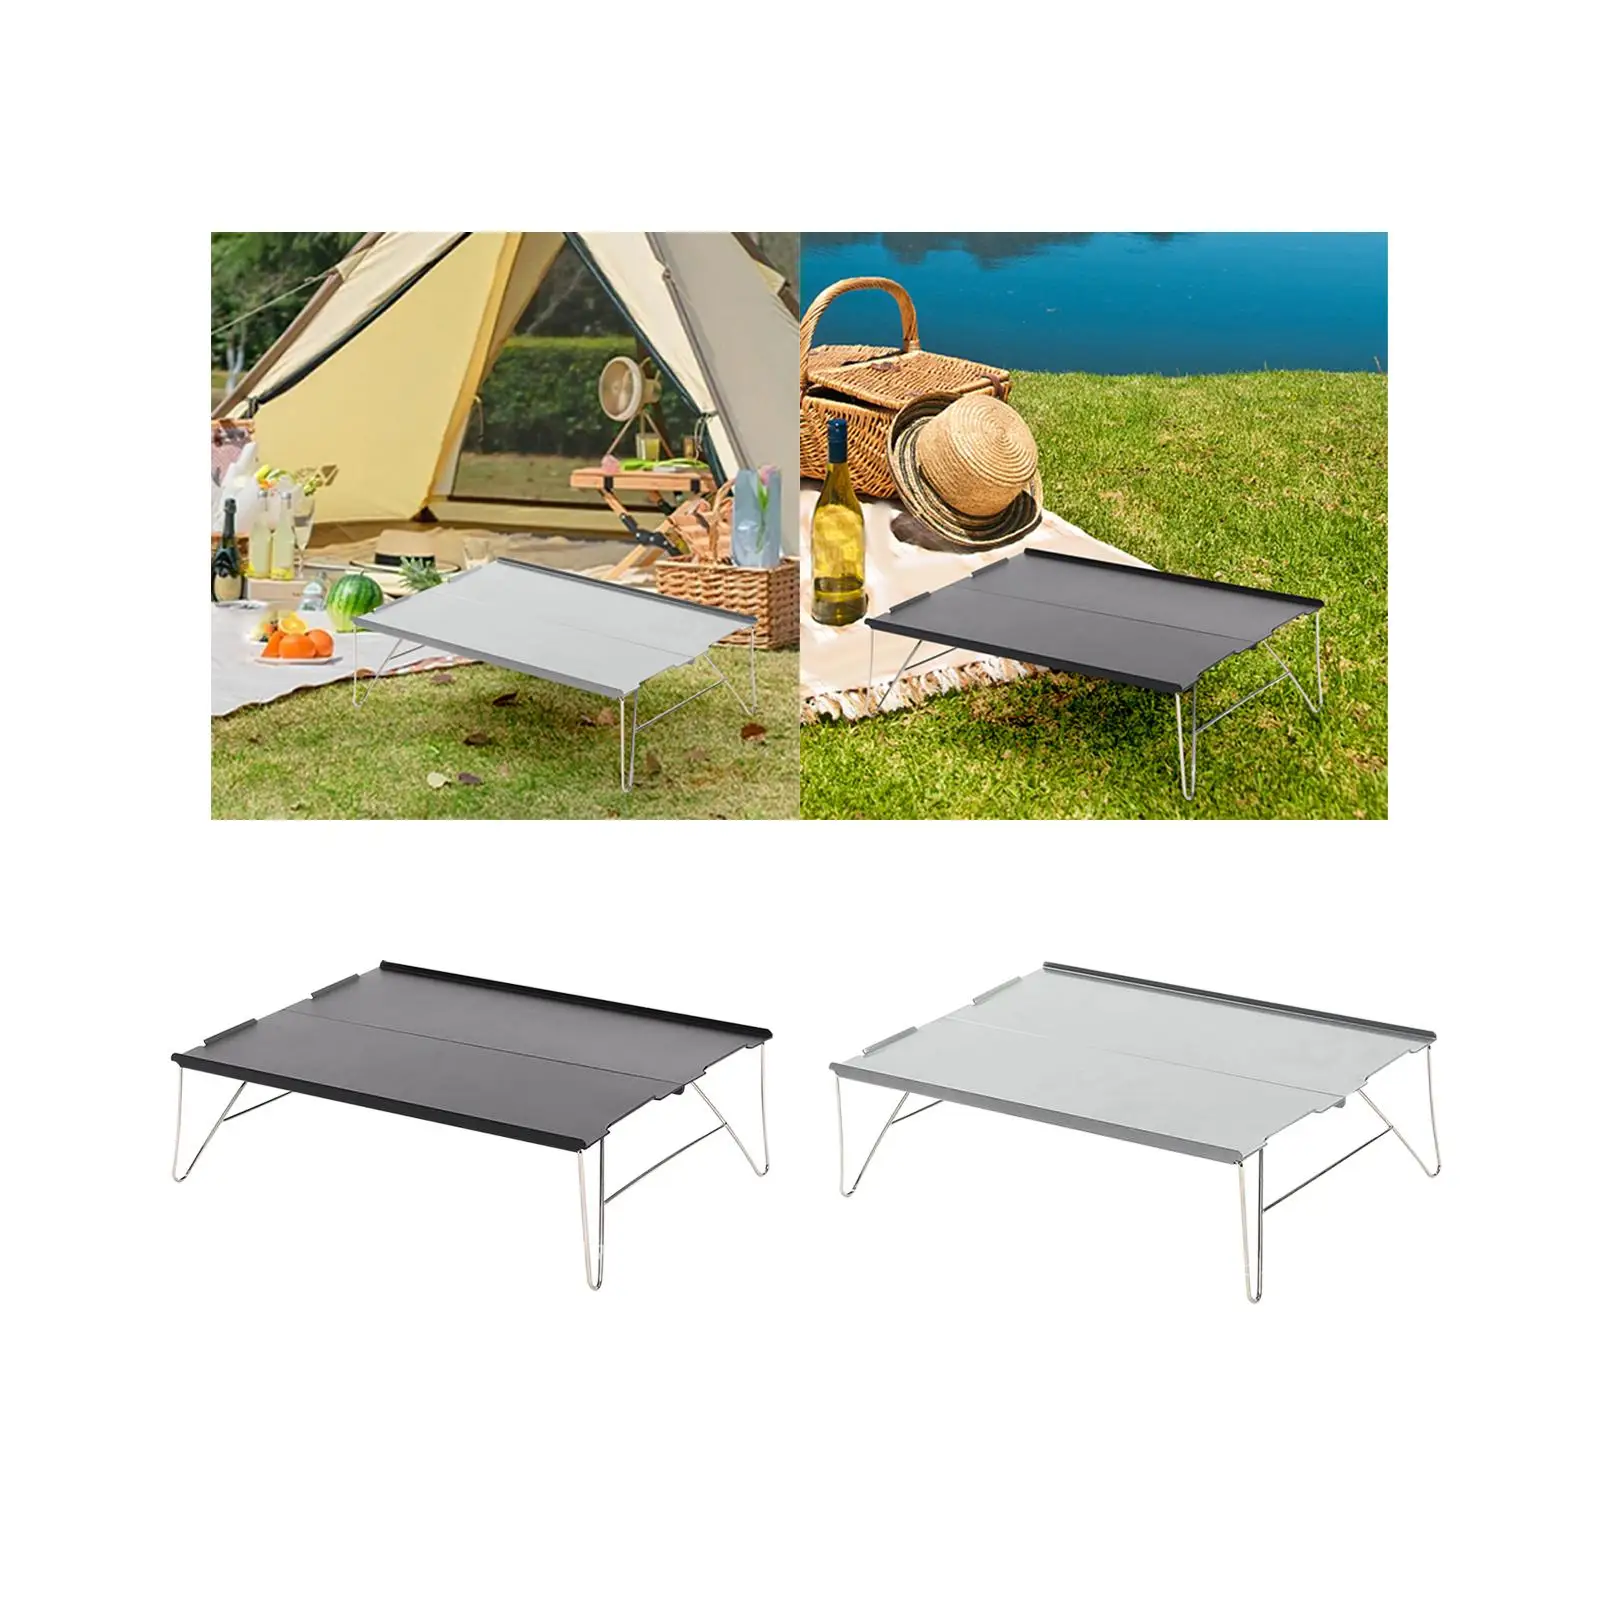 Camp Table Mini Table Square Multifunctional Laptop Side Table Small Folding Desk for Picnic Travel Outdoor Garden